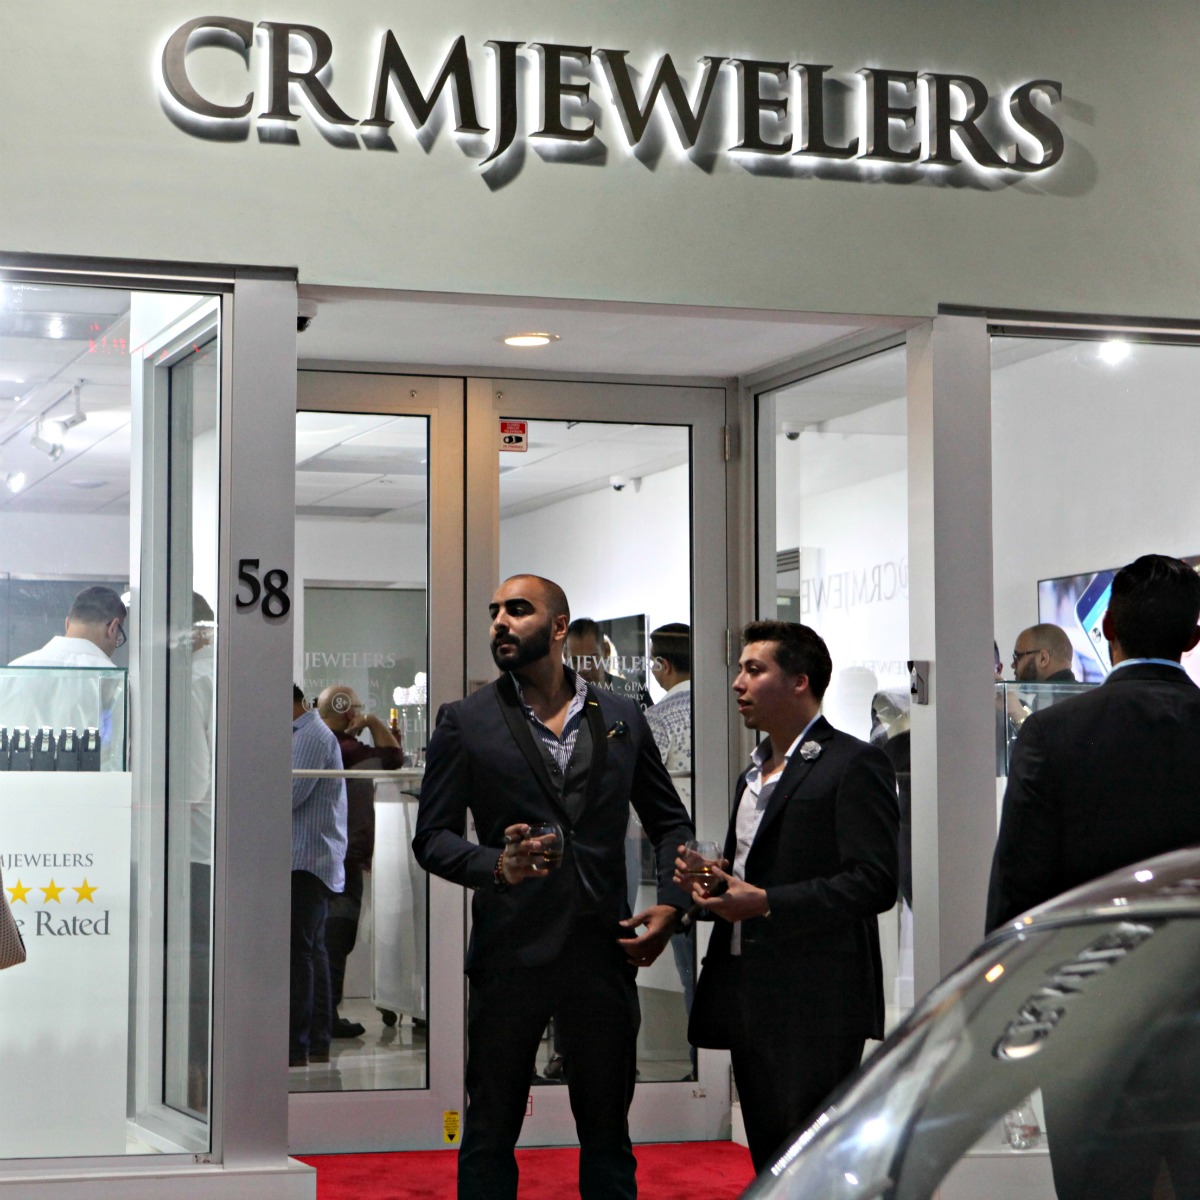 Scotches and Watches: Chivas Hosts CRM Jewelers' Grand Opening